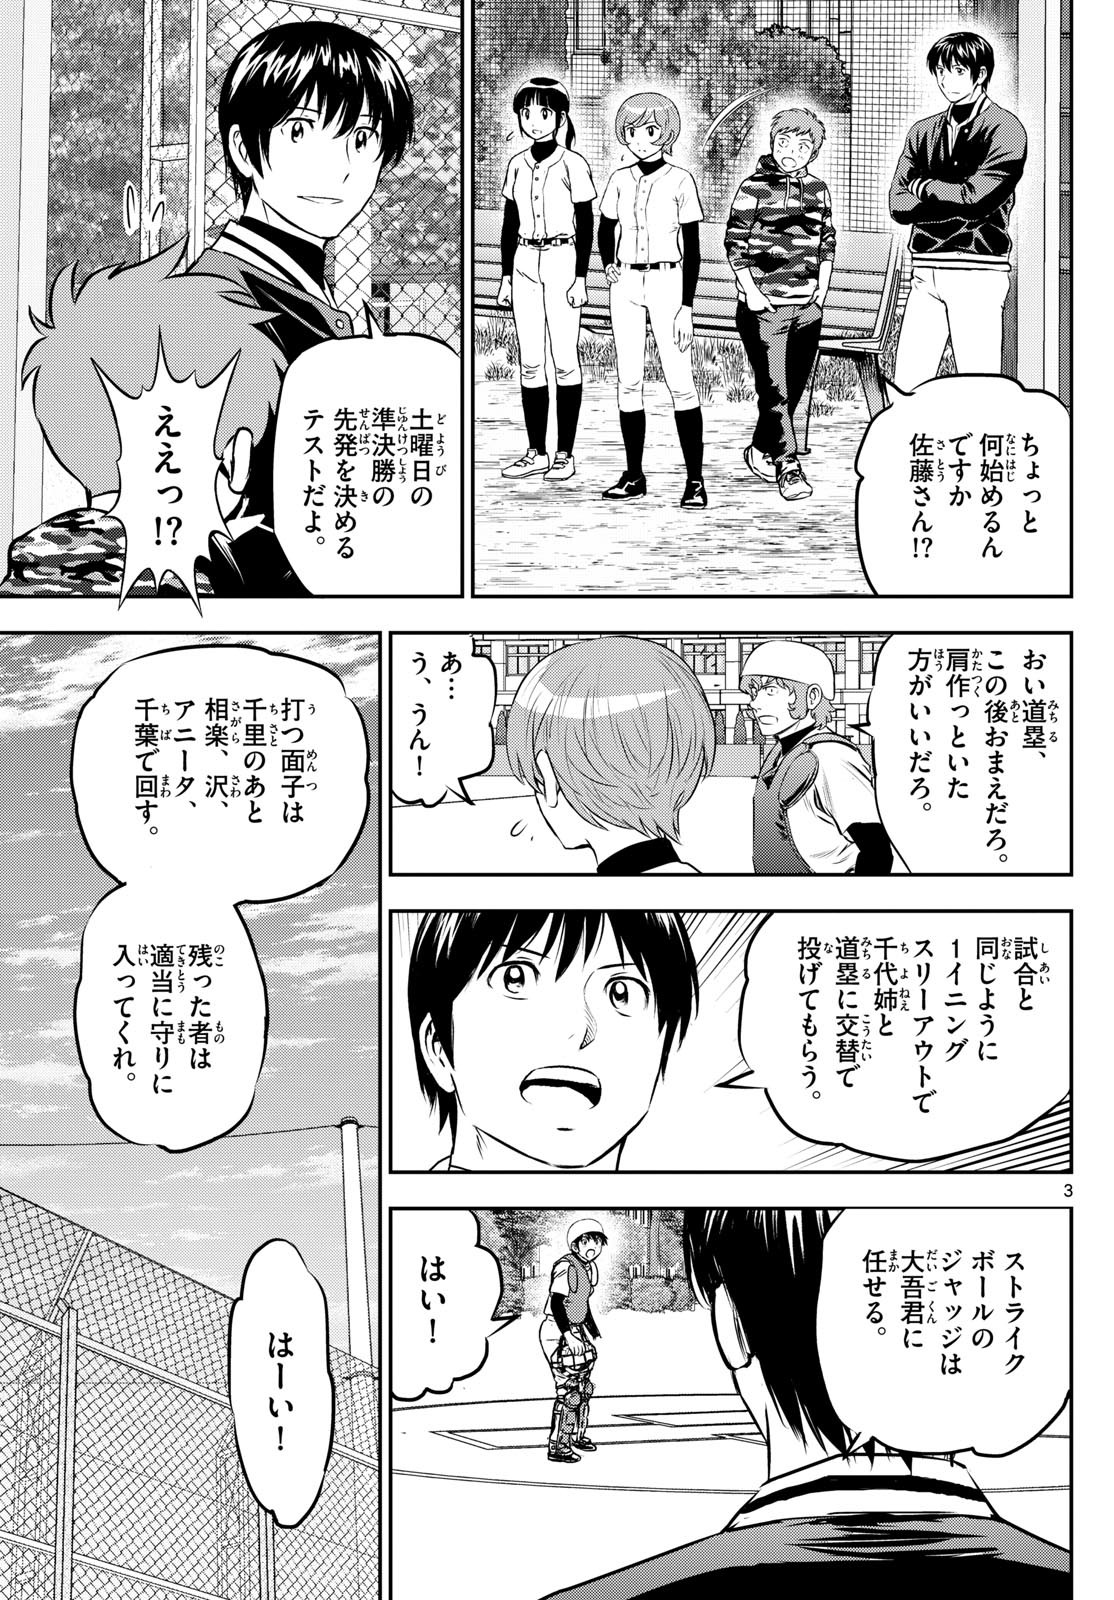 Major 2nd - メジャーセカンド - Chapter 280 - Page 3